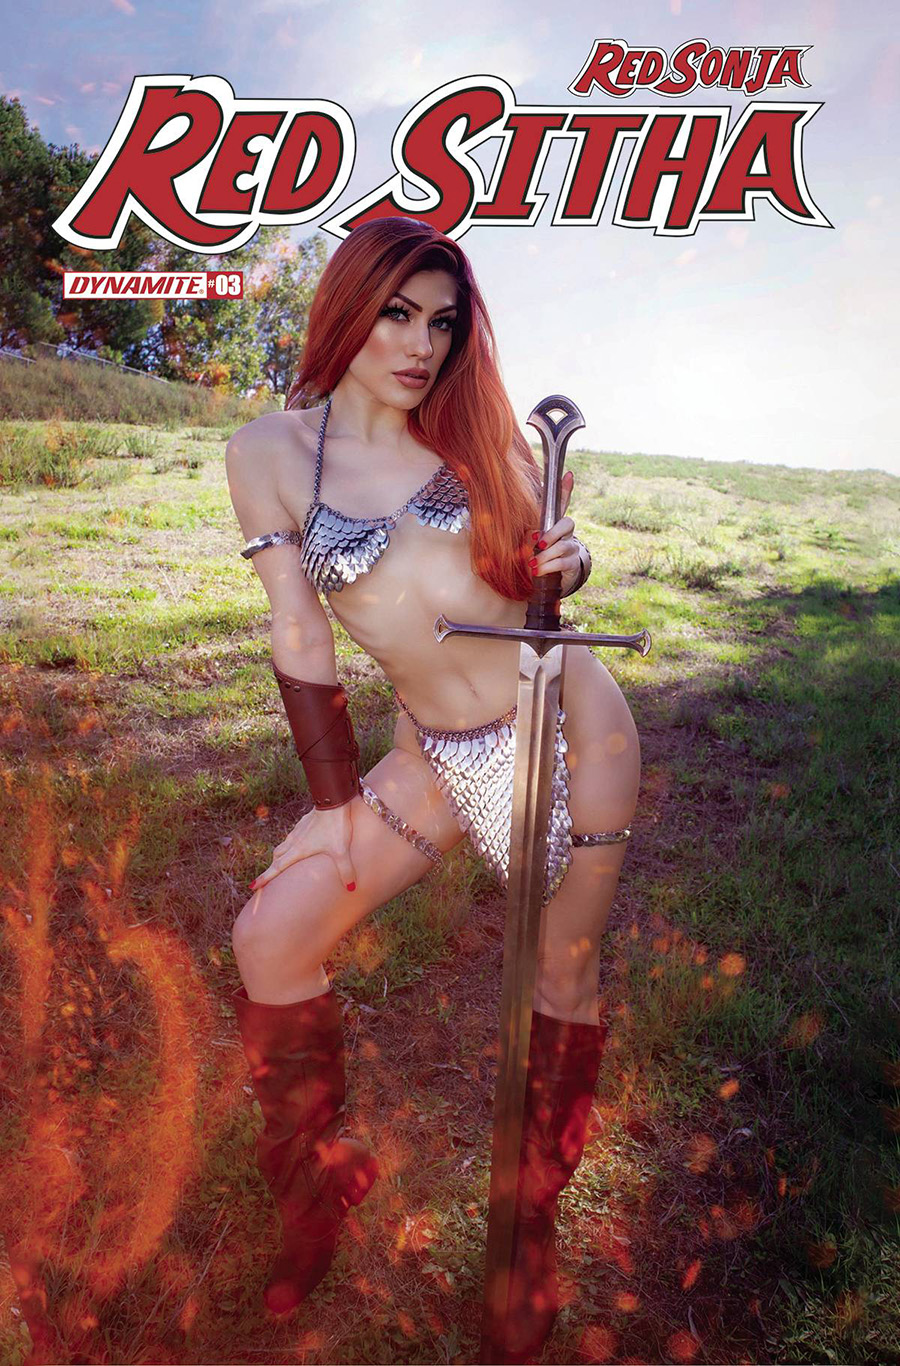 Red Sonja Red Sitha #4 Cover E Variant Rachel Hollon Cosplay Photo Cover